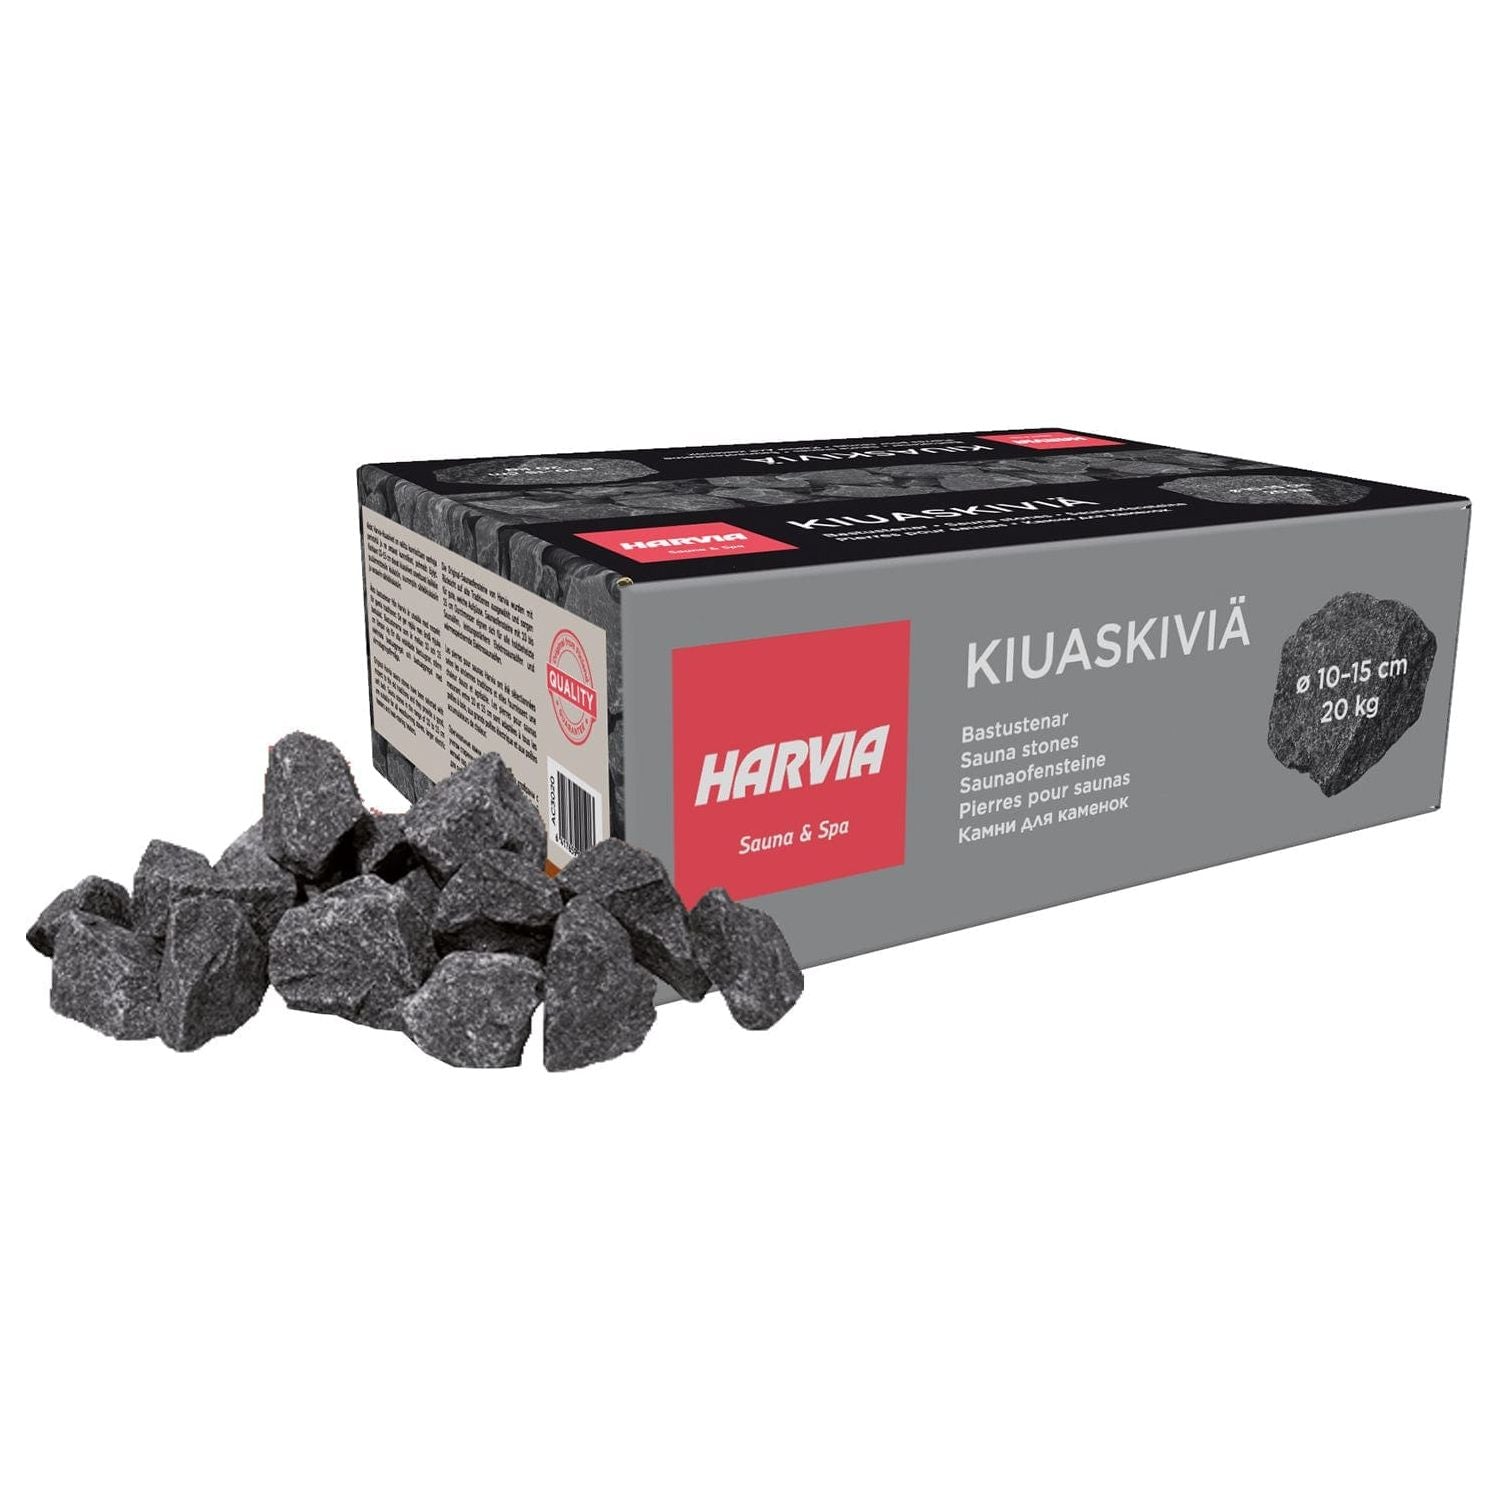 Sauna Wellness Shop Harvia, 3 boxes of 5-10cm stones *Not Sold Separately